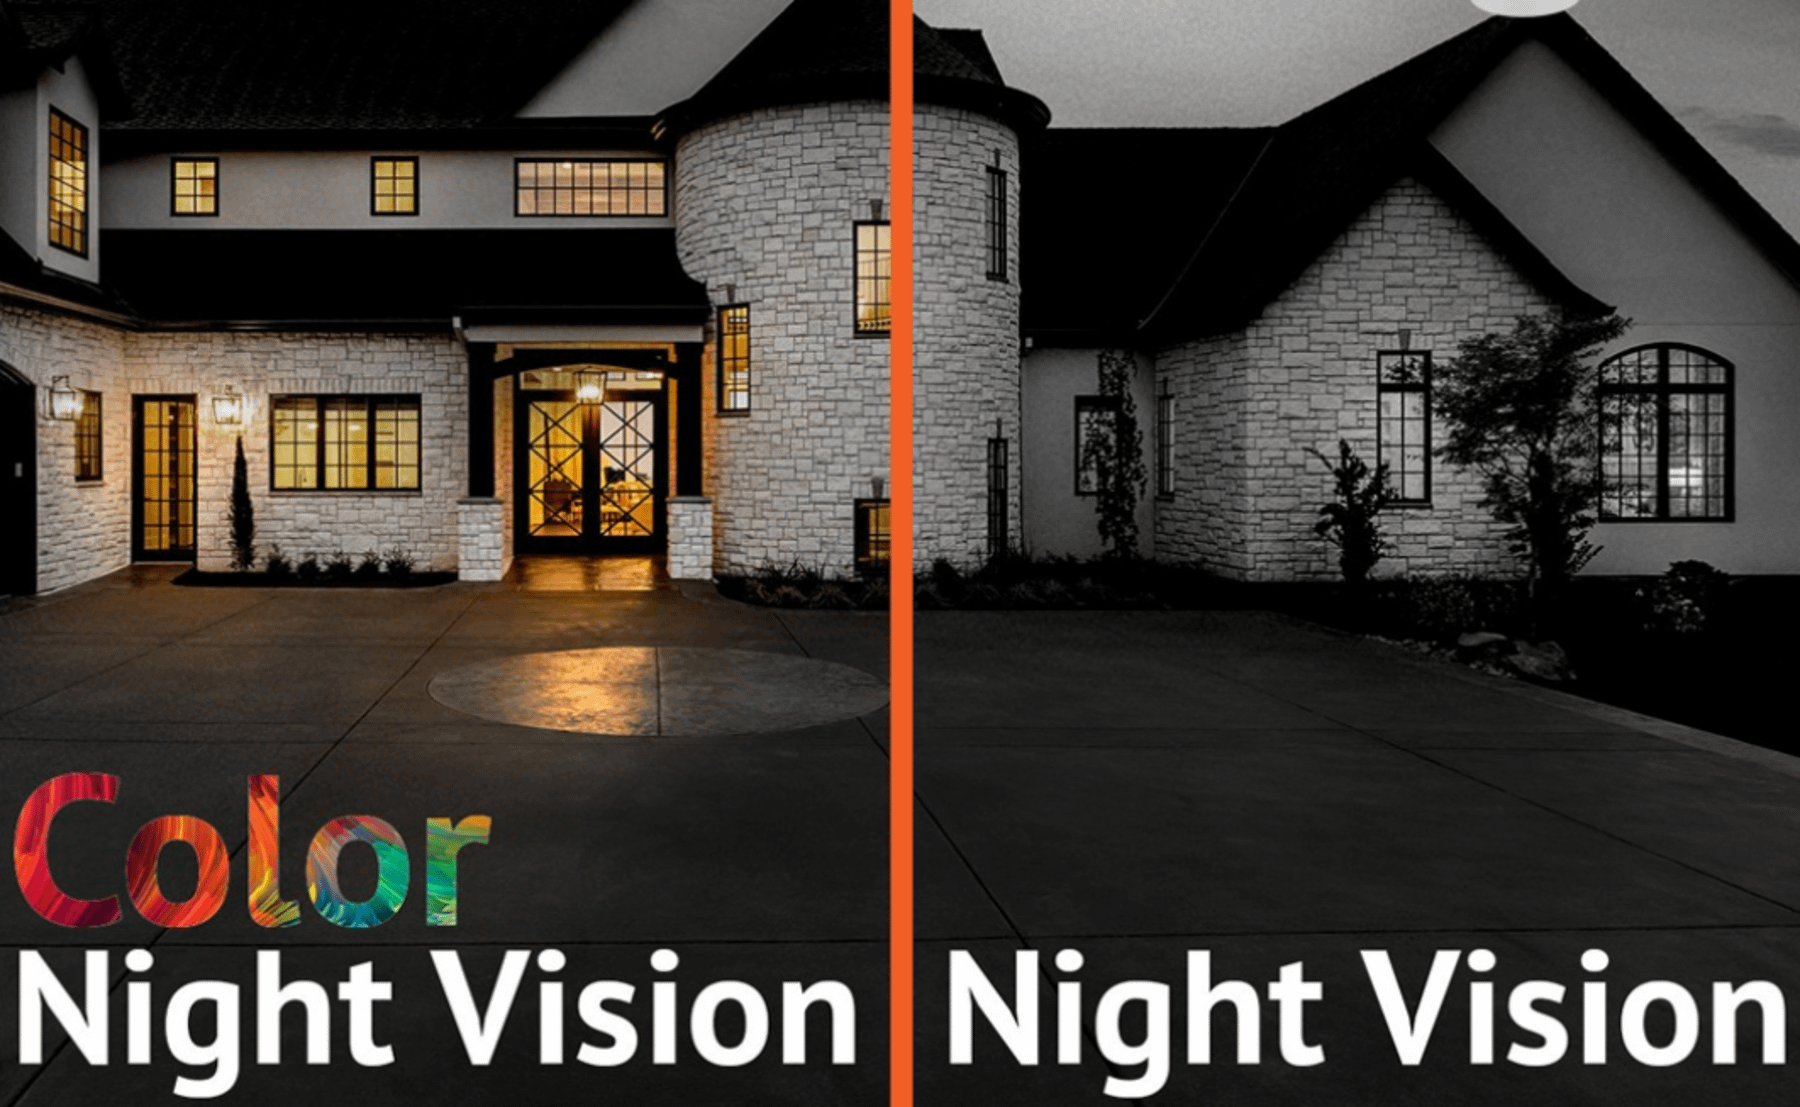 Two pictures of the house-right one in color night vision, left one in regular night vision